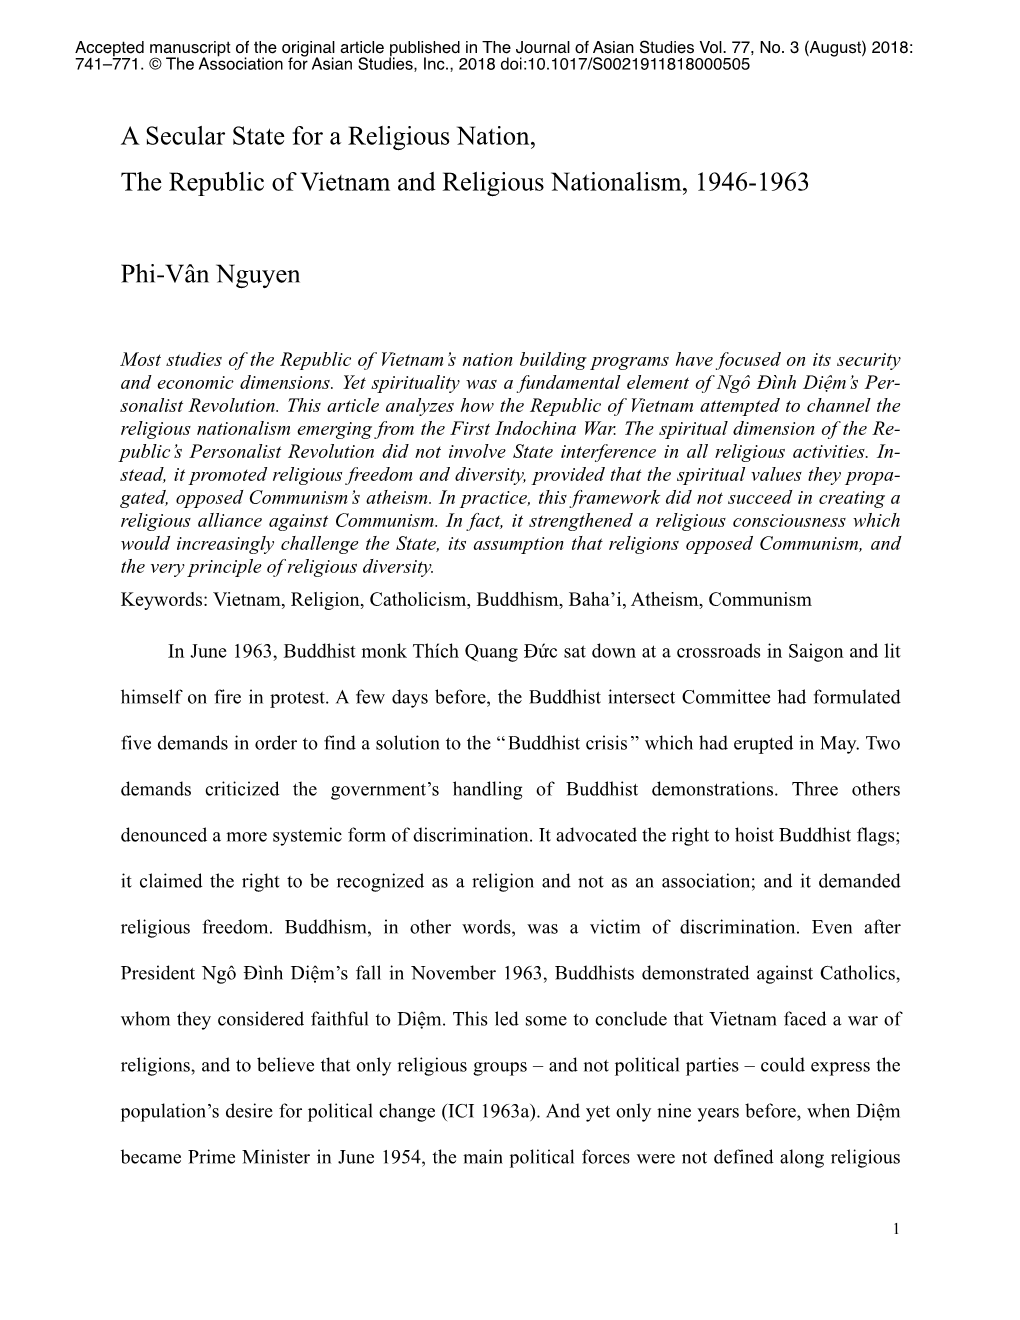 A Secular State for a Religious Nation, the Republic of Vietnam and Religious Nationalism, 1946-1963